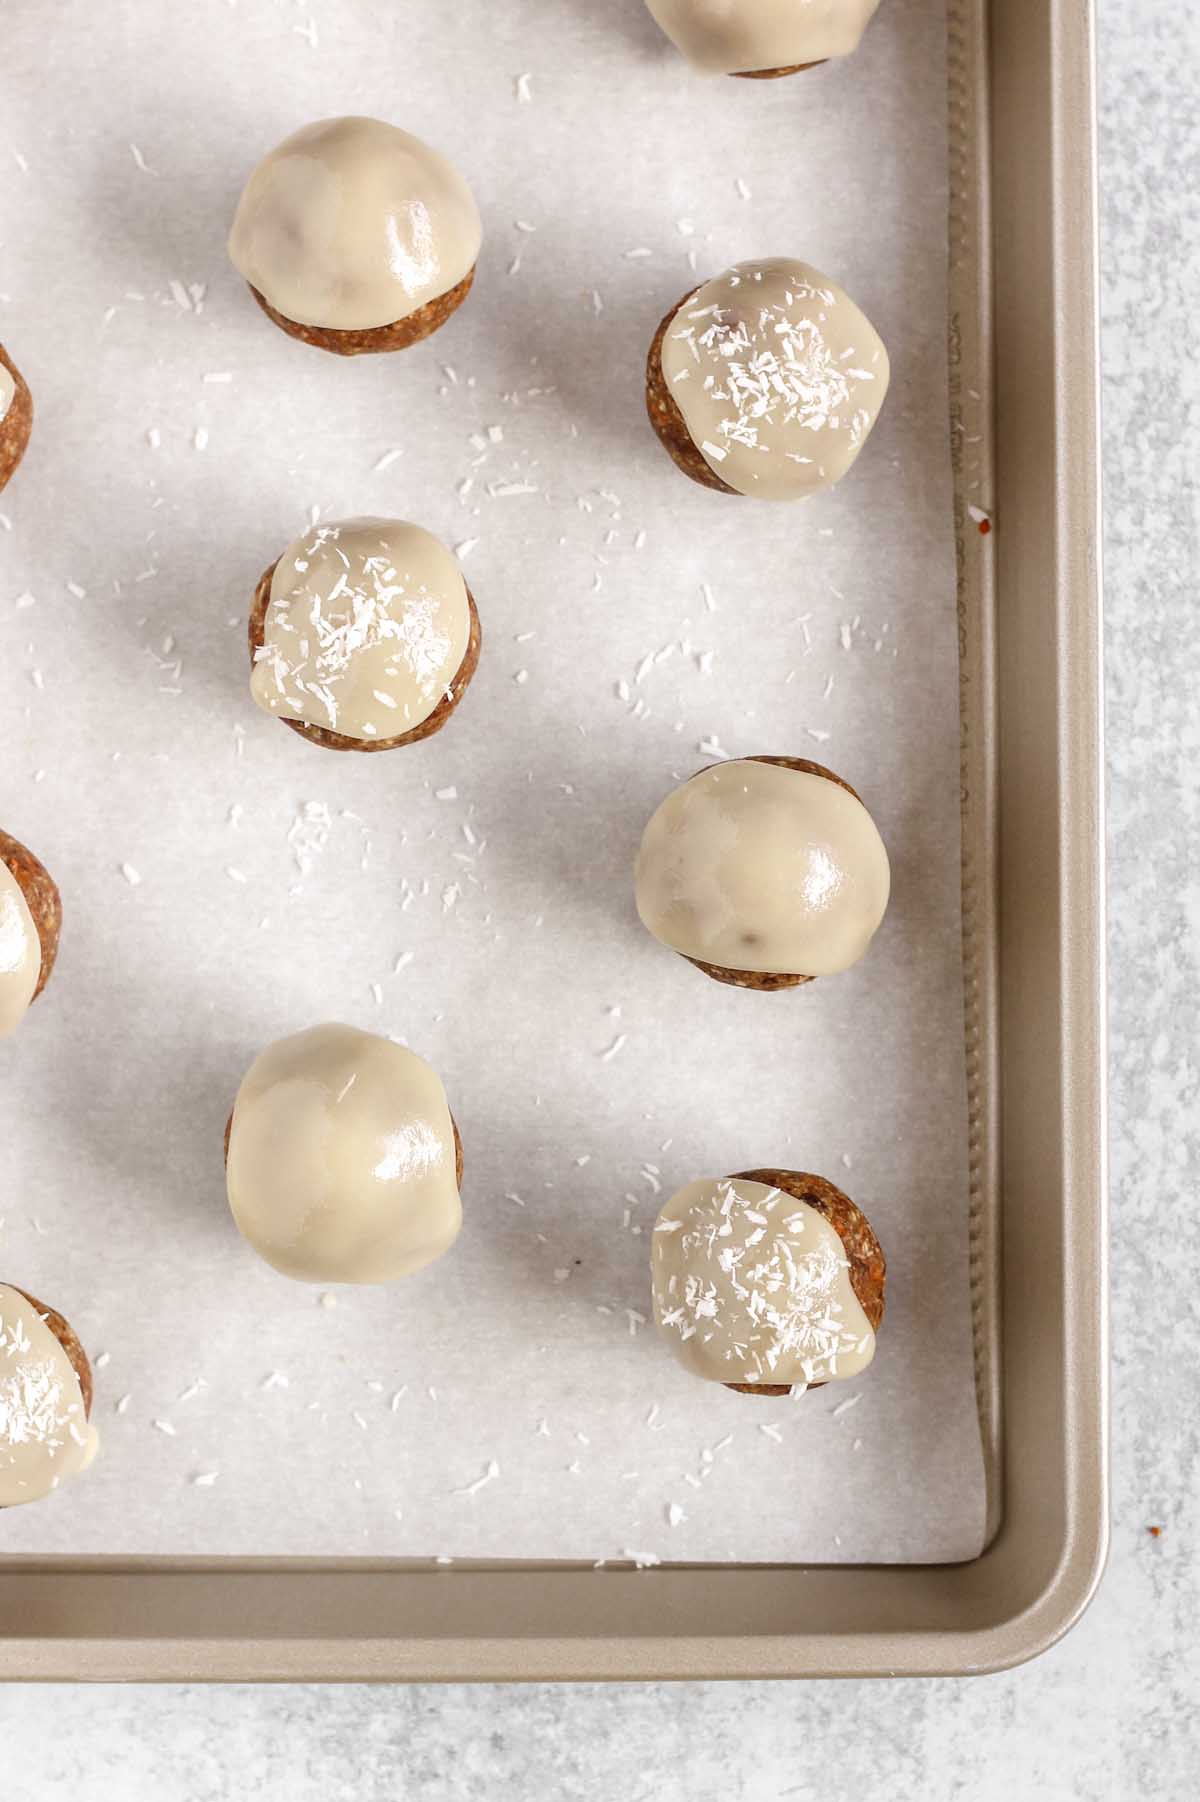 Carrot cake energy balls topped with glaze and sprinkled with coconut flakes on a cookie sheet.